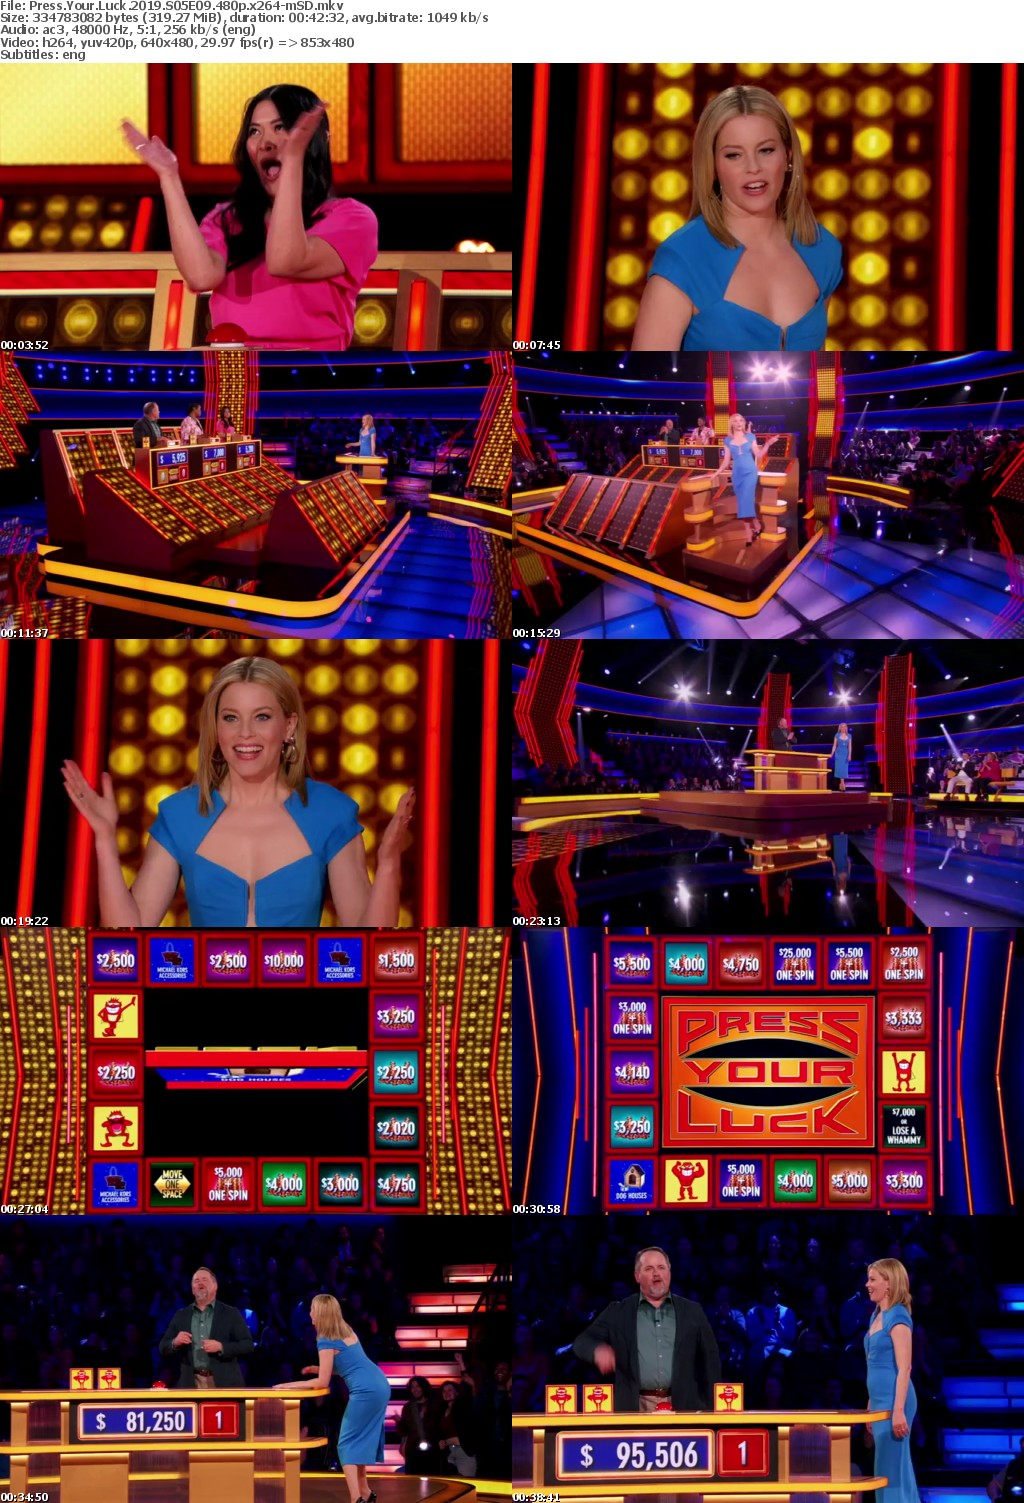 Press Your Luck 2019 S05E09 480p x264-mSD